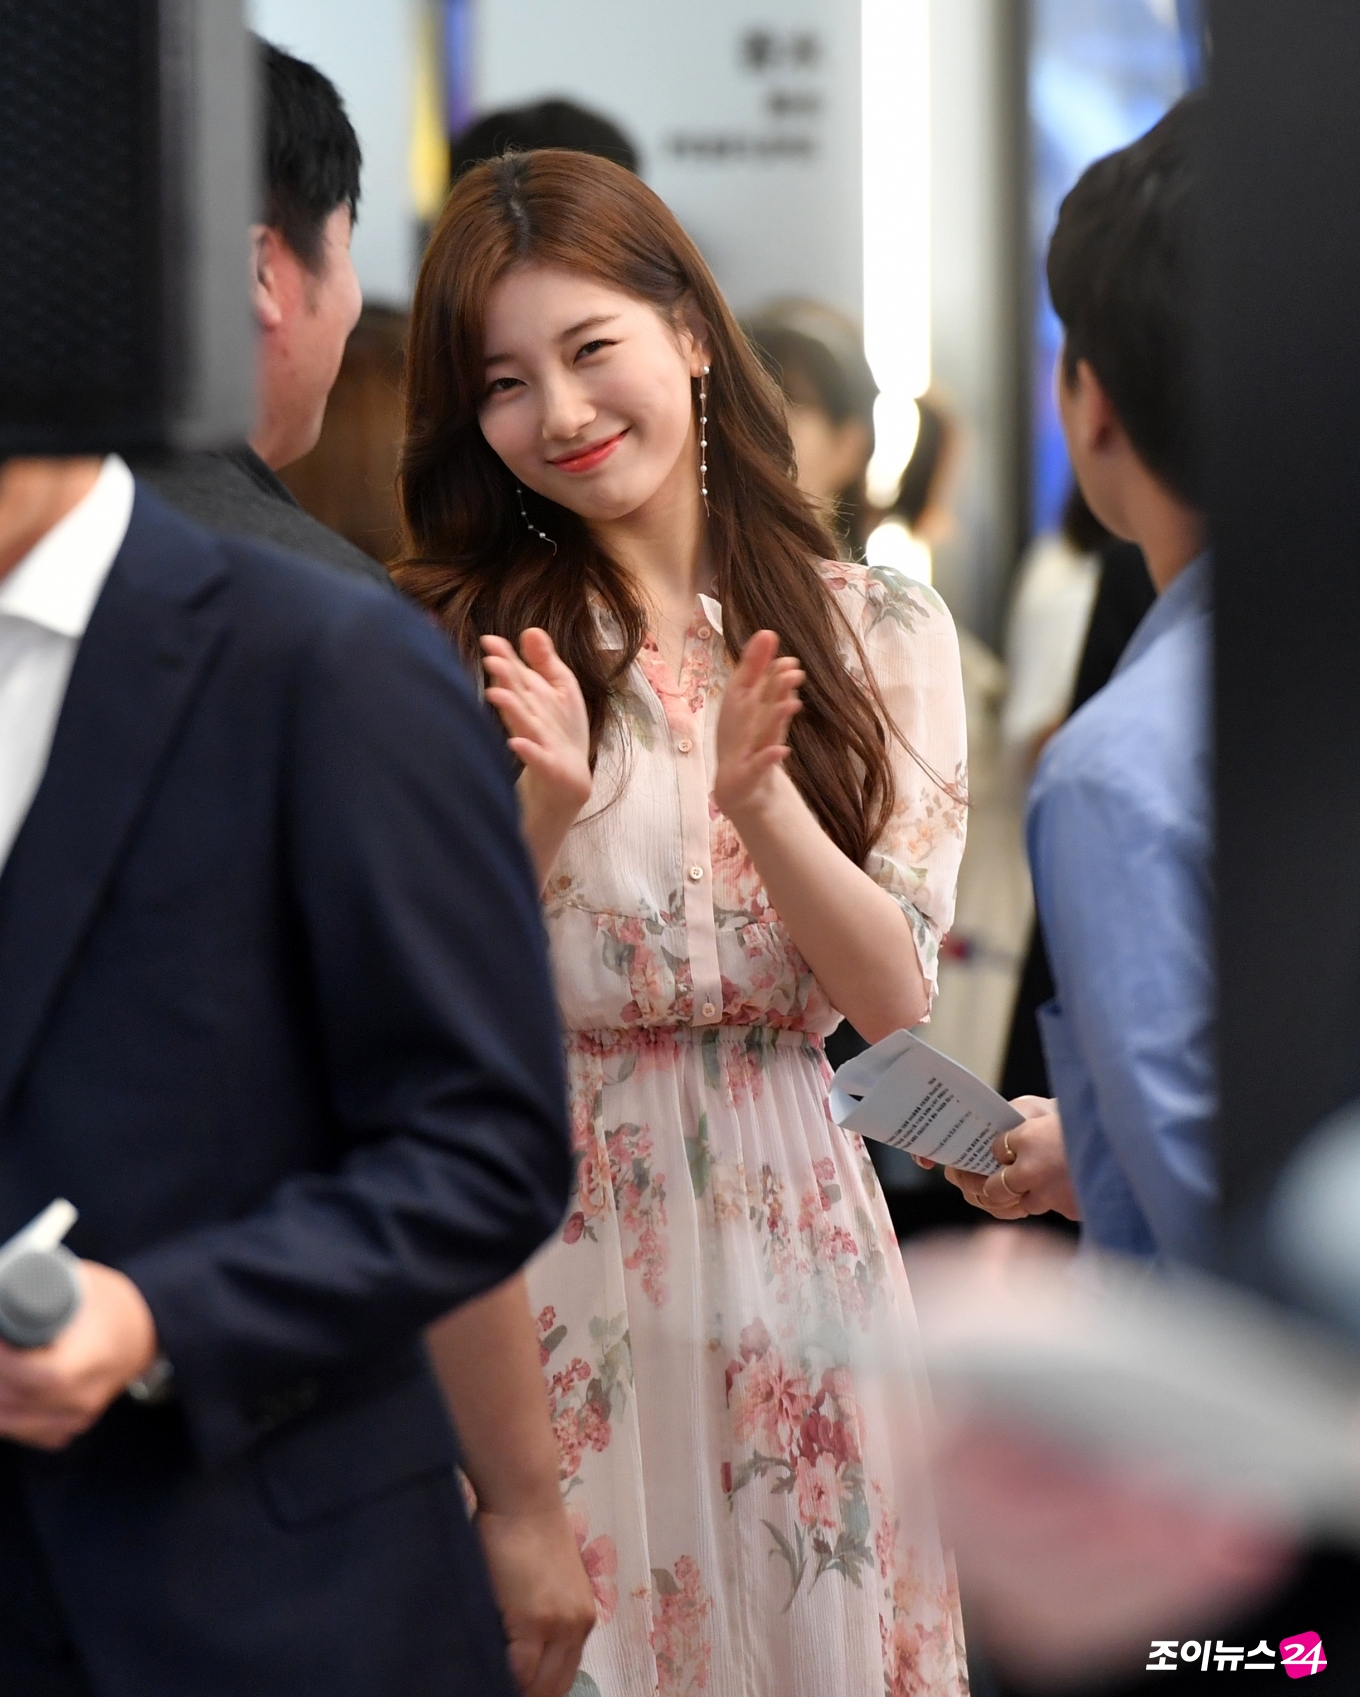 Actor and singer Bae Suzy is waiting to attend the global beauty brand Lancome Photo Call Event held at Myeongdong branch of Shinsegae Duty Free Shop in Jung-gu, Seoul on the afternoon of the 19th.Lancome held a Make-up event at the event hall to commemorate the launch of the global campaign of Make-Up Is My Power (MAKE UP IS MY POWER) of the new foundation line Edol Long Rasting Foundation.